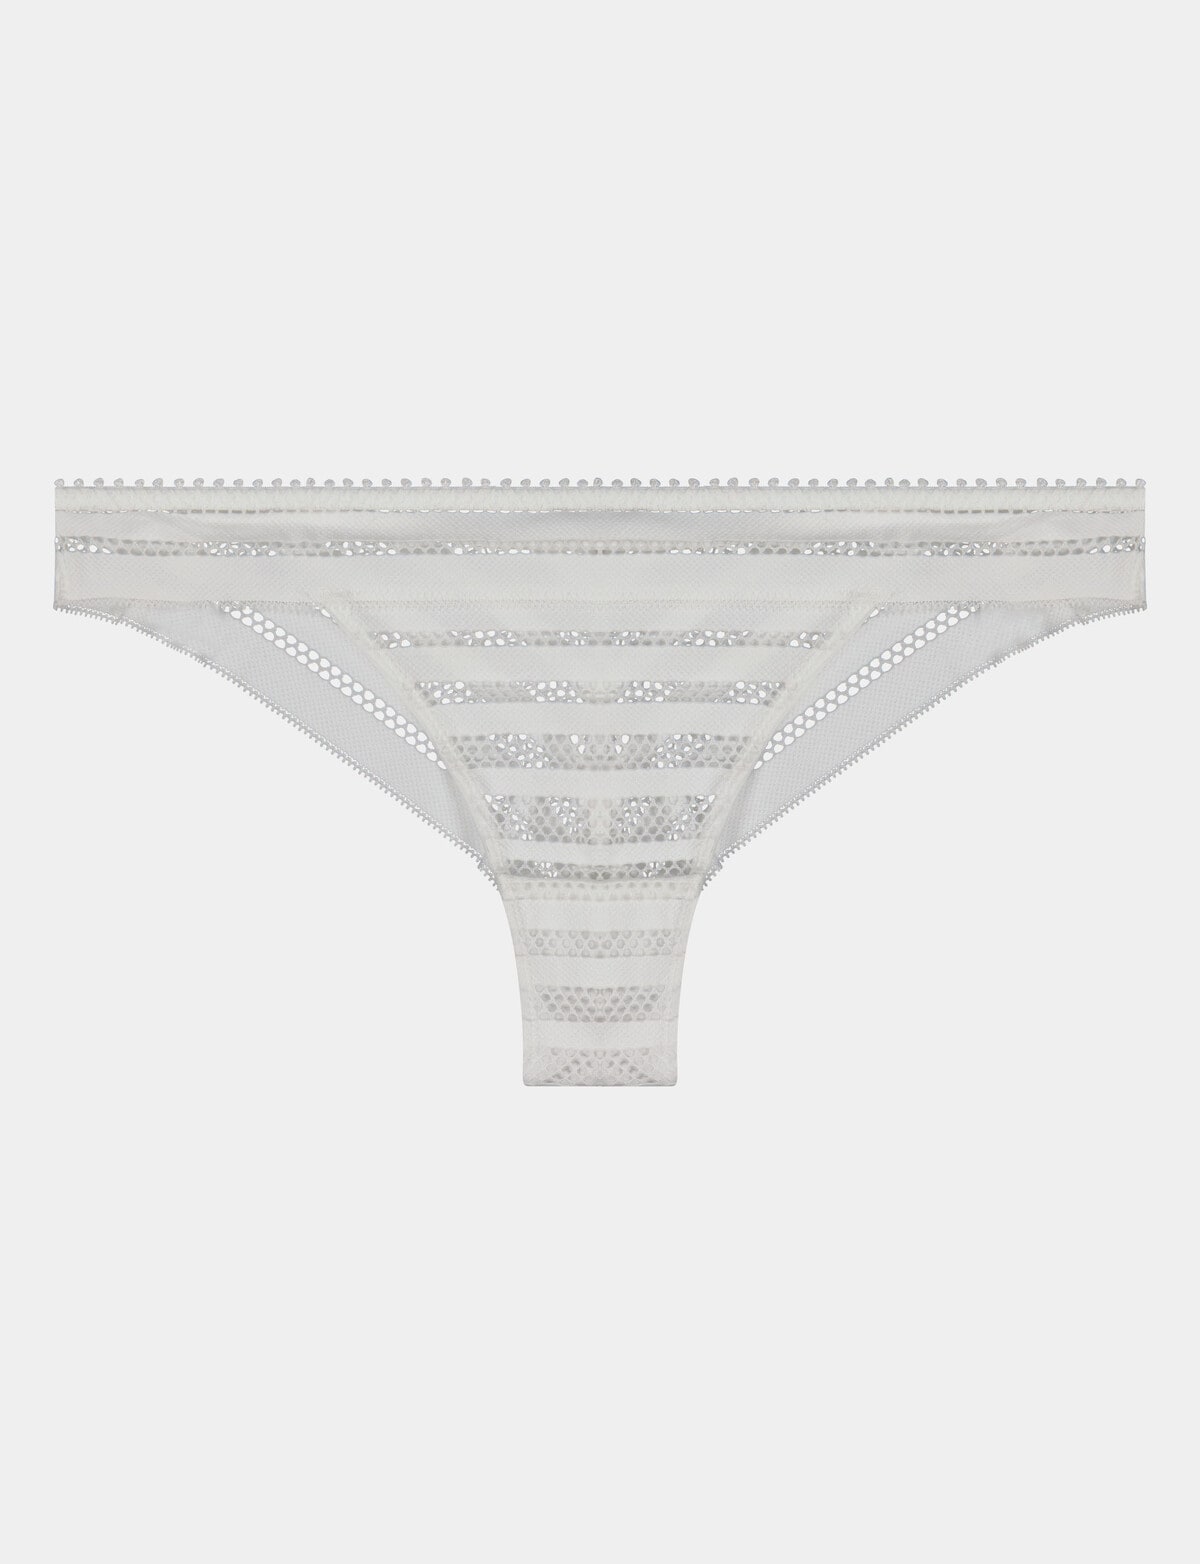 Me By Bendon Morning Lola Thong Brief, White, S-XL - Briefs